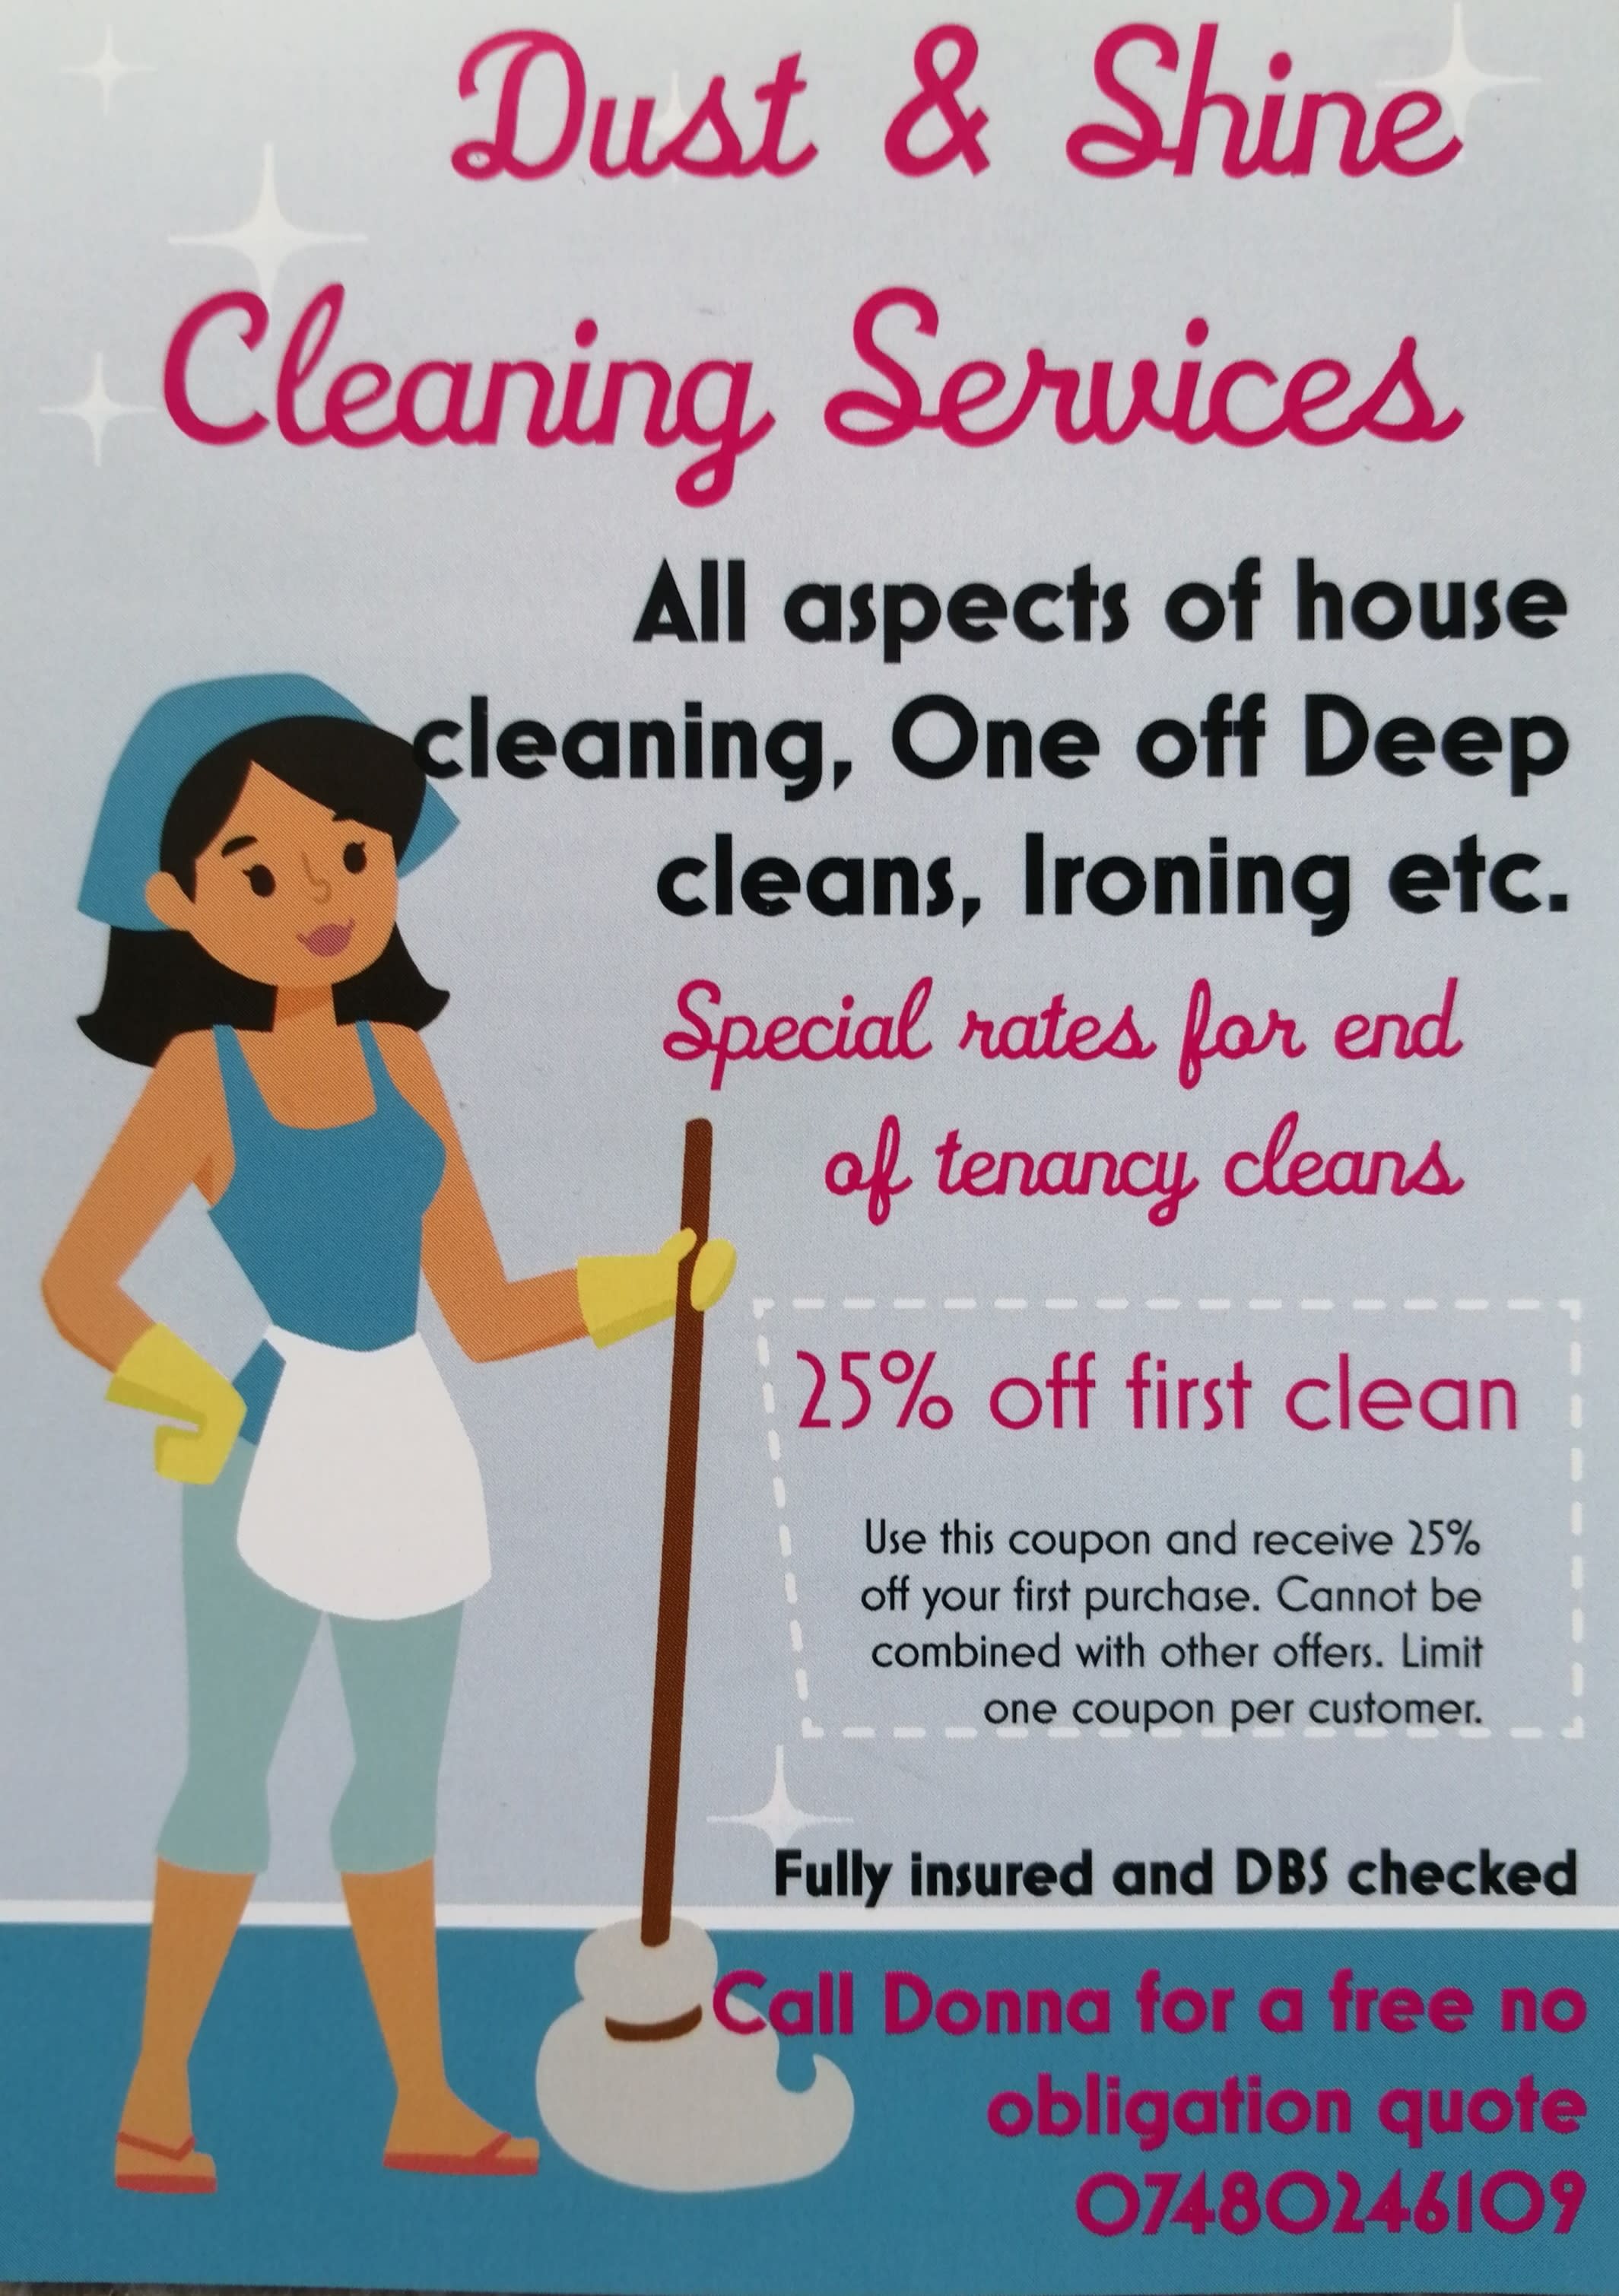 Dust & Shine Cleaning Services Ltd